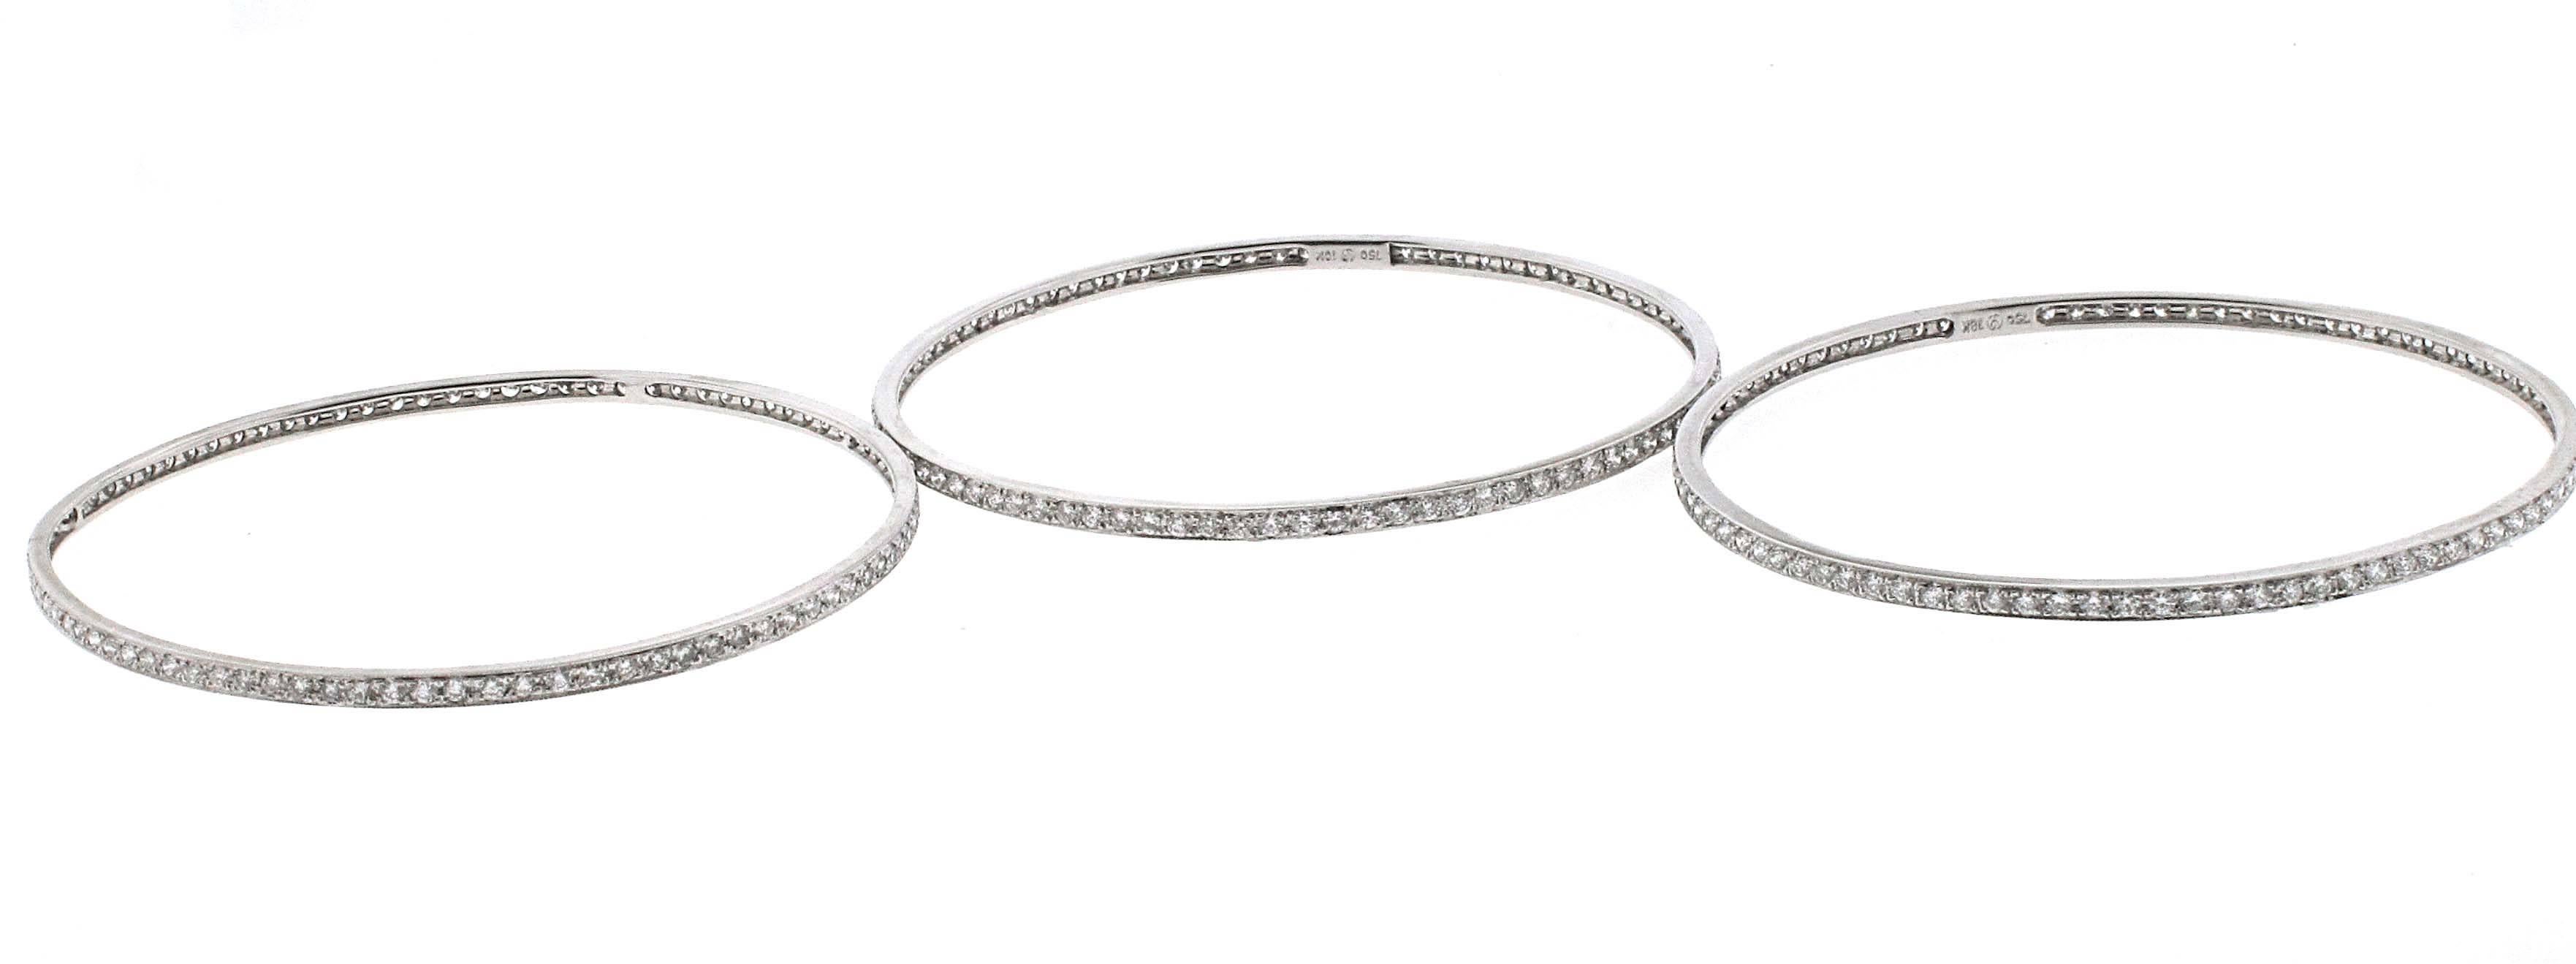 Contemporary Set of 18 Karat White Gold Bangles with 9.50 Carat in Diamonds